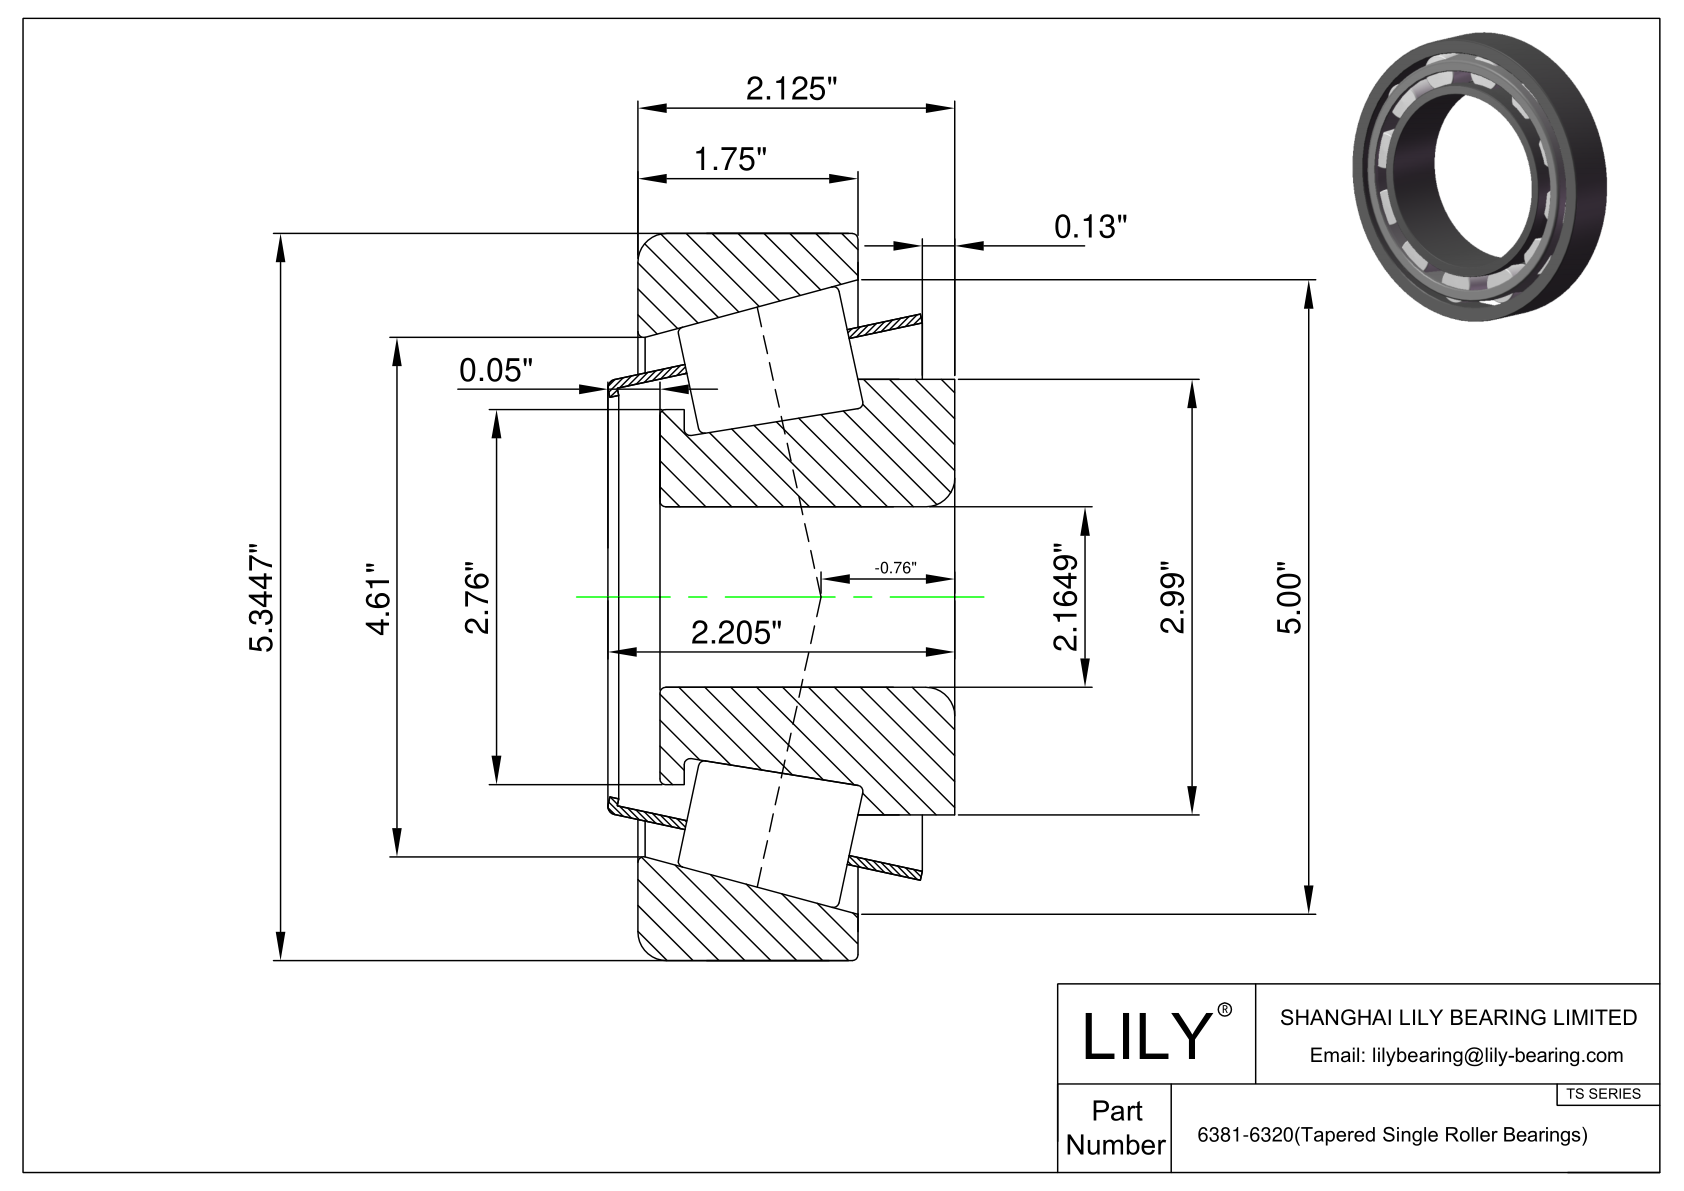 6381-6320 TS (Tapered Single Roller Bearings) (Imperial) cad drawing